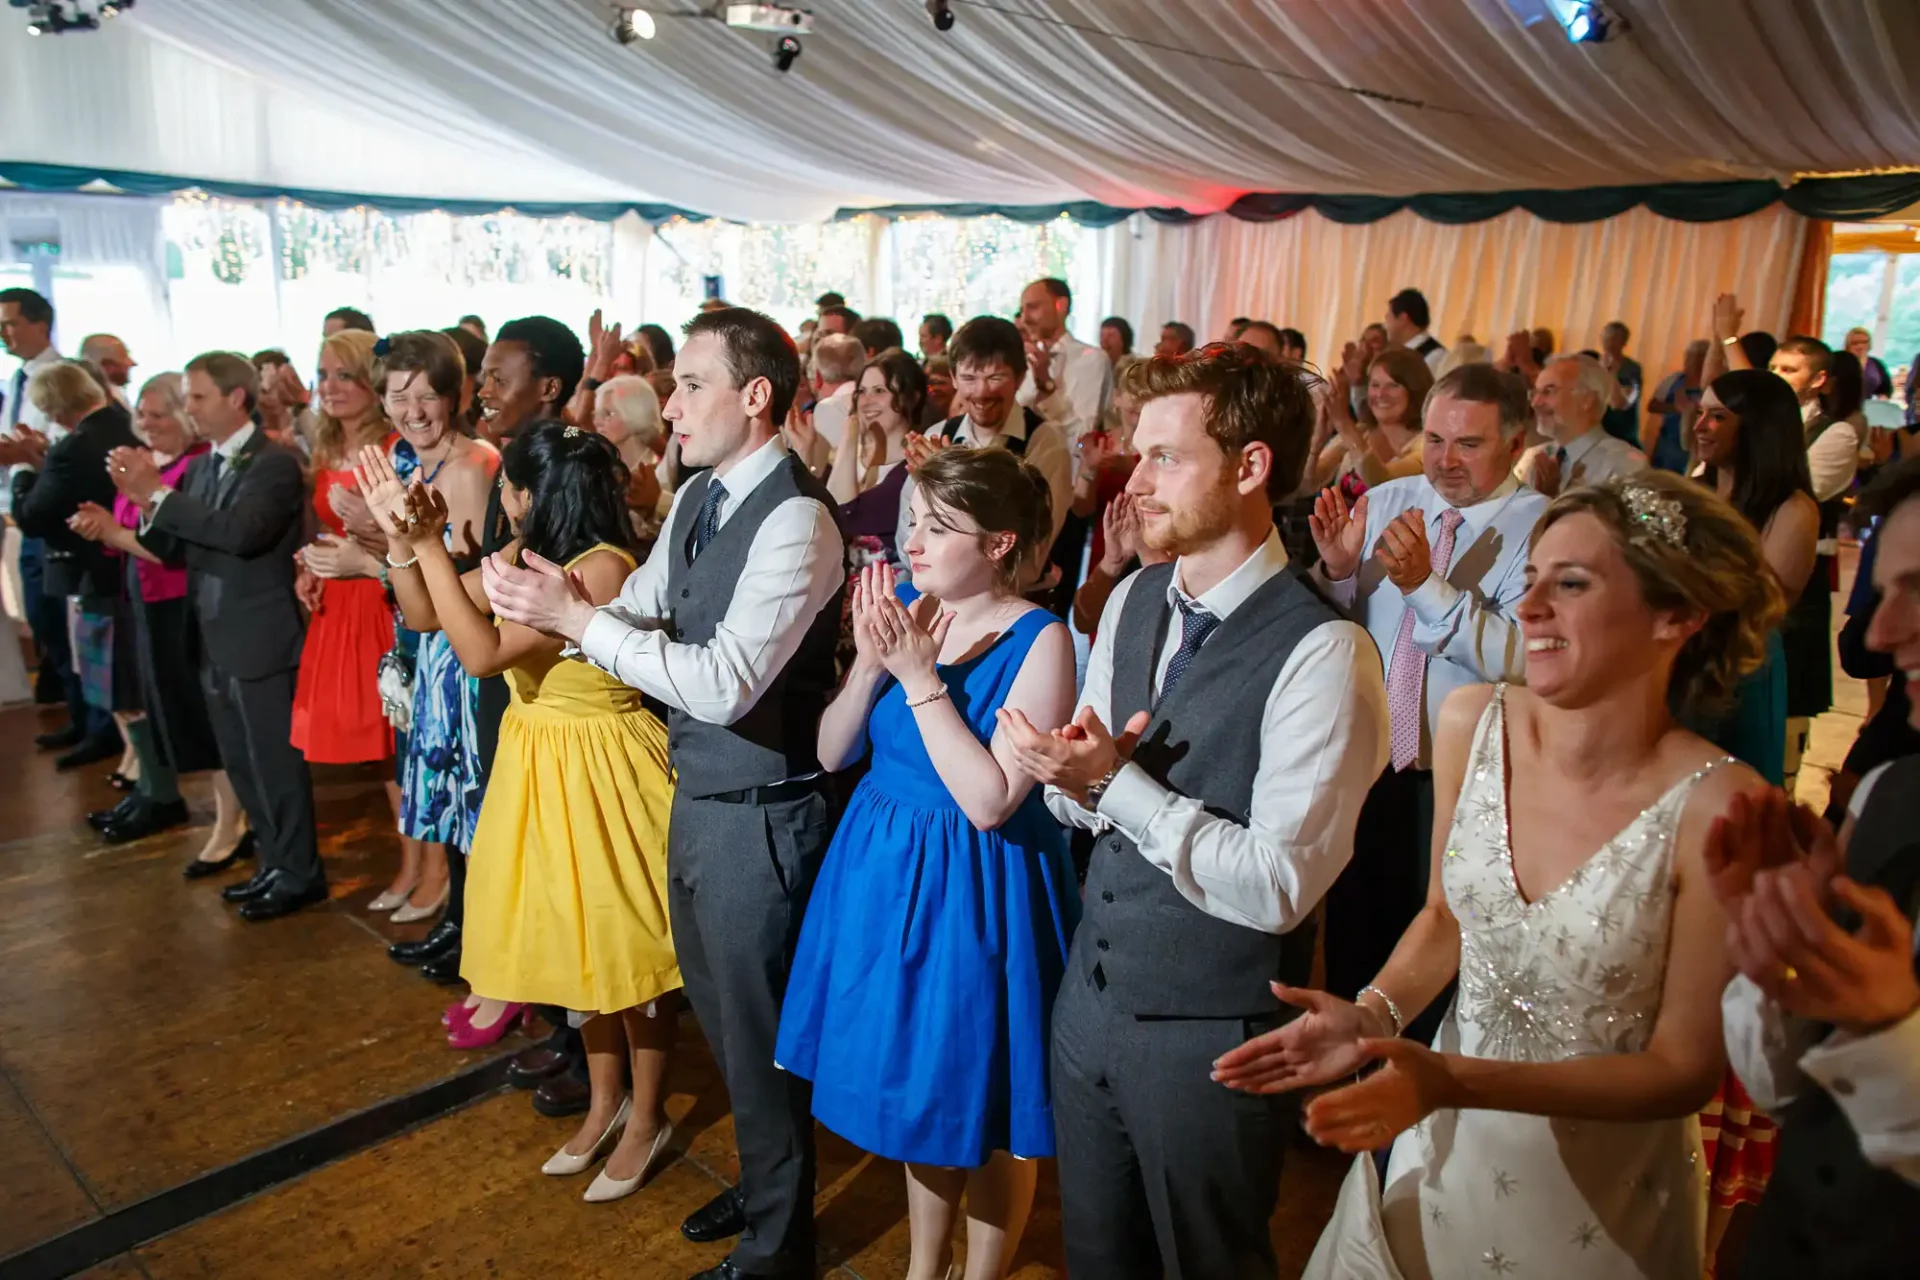 A group of elegantly dressed people clapping and smiling at a wedding reception inside a tent.